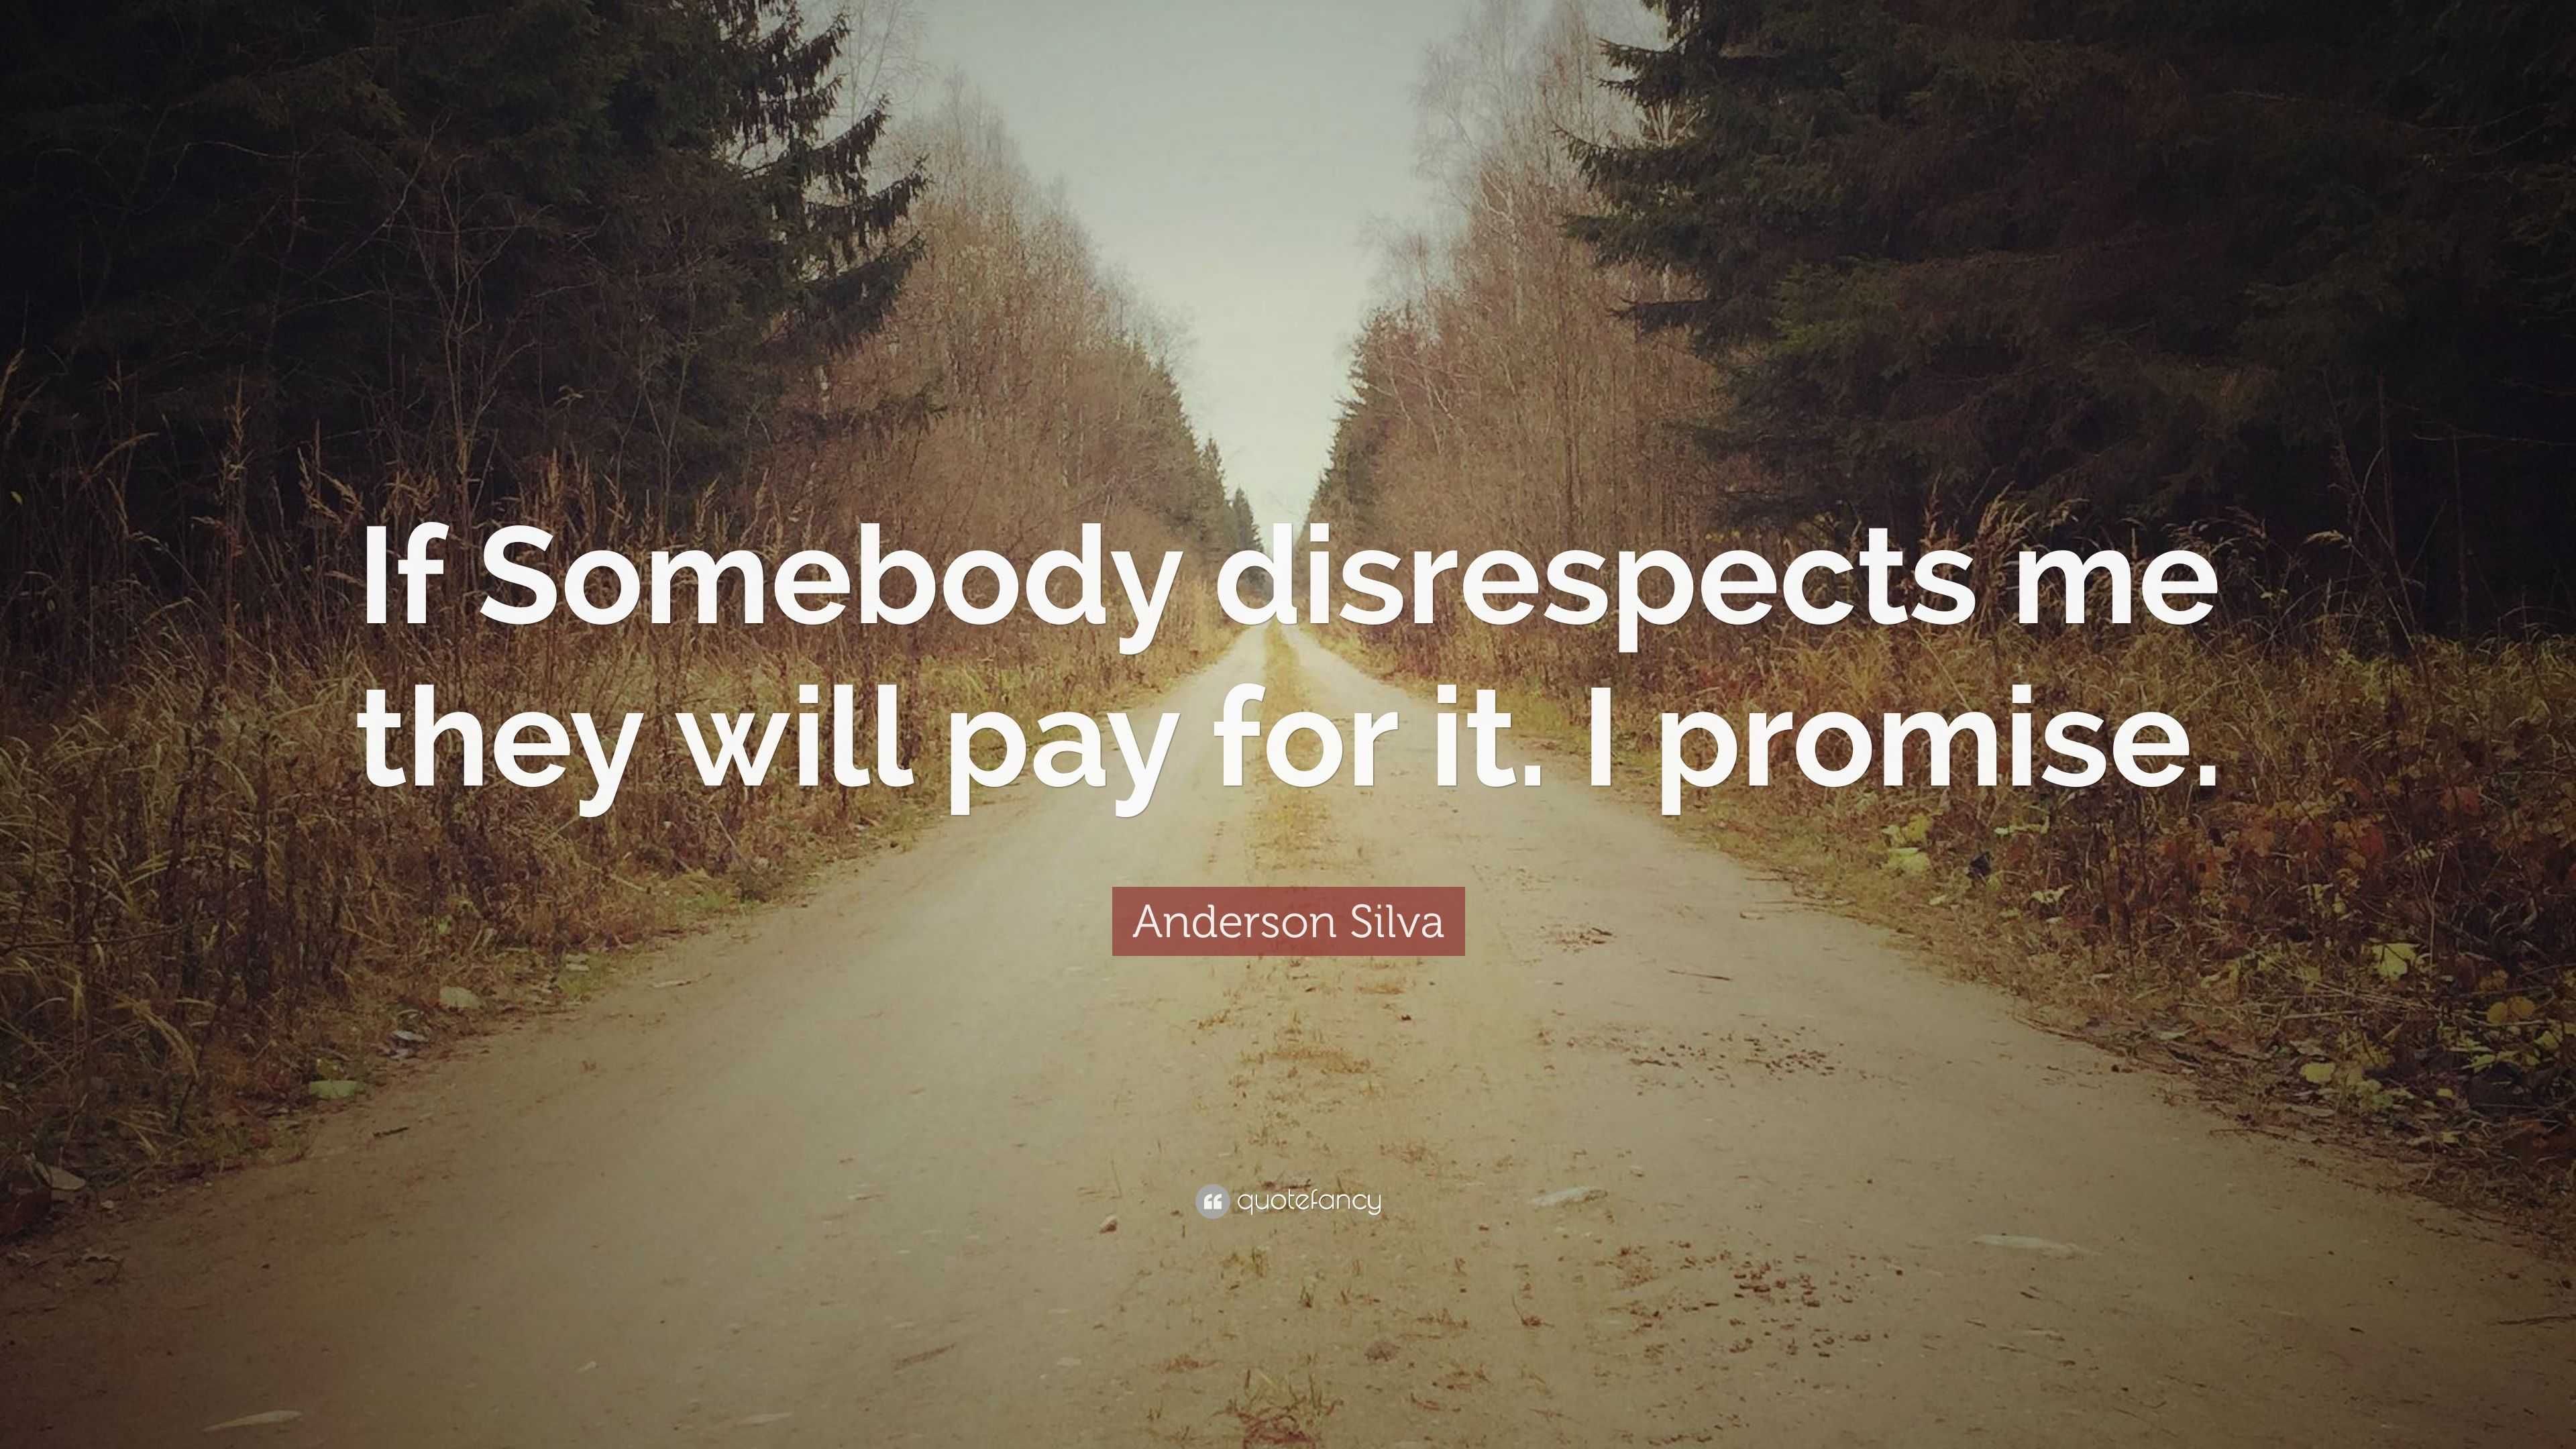 Anderson Silva Quote “if Somebody Disrespects Me They Will Pay For It